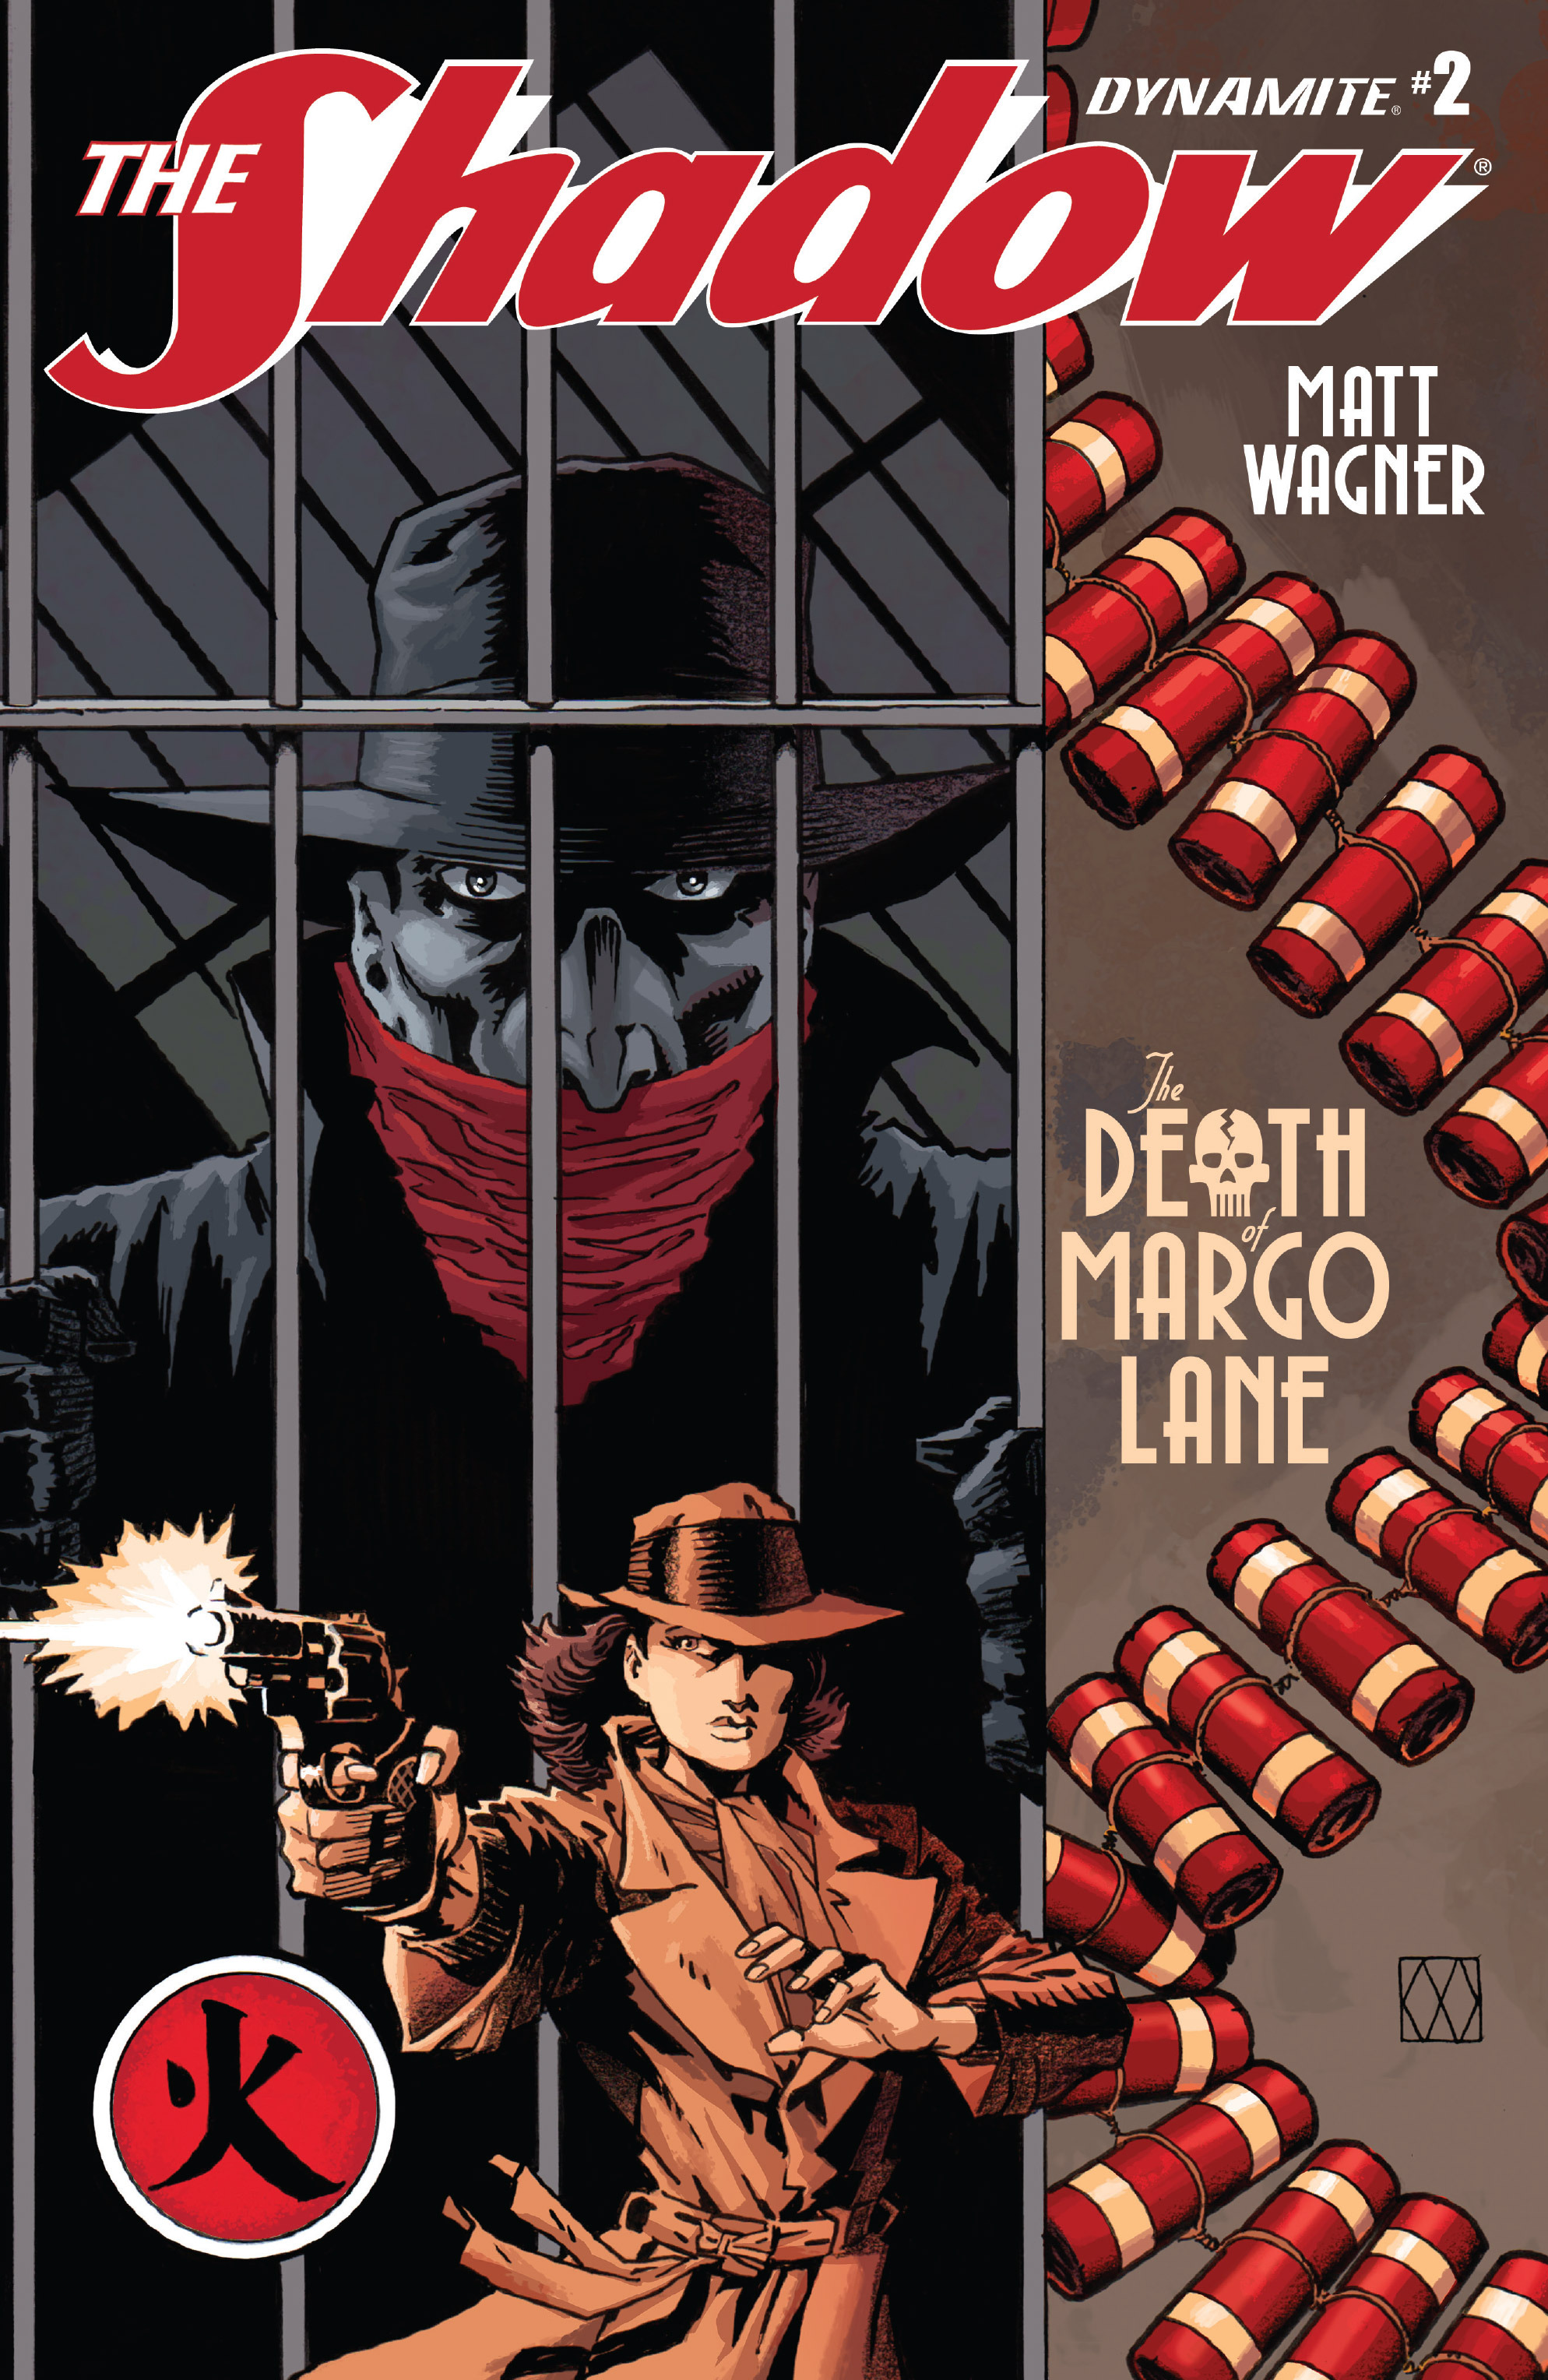 Read online The Shadow: The Death of Margot Lane comic -  Issue #2 - 1